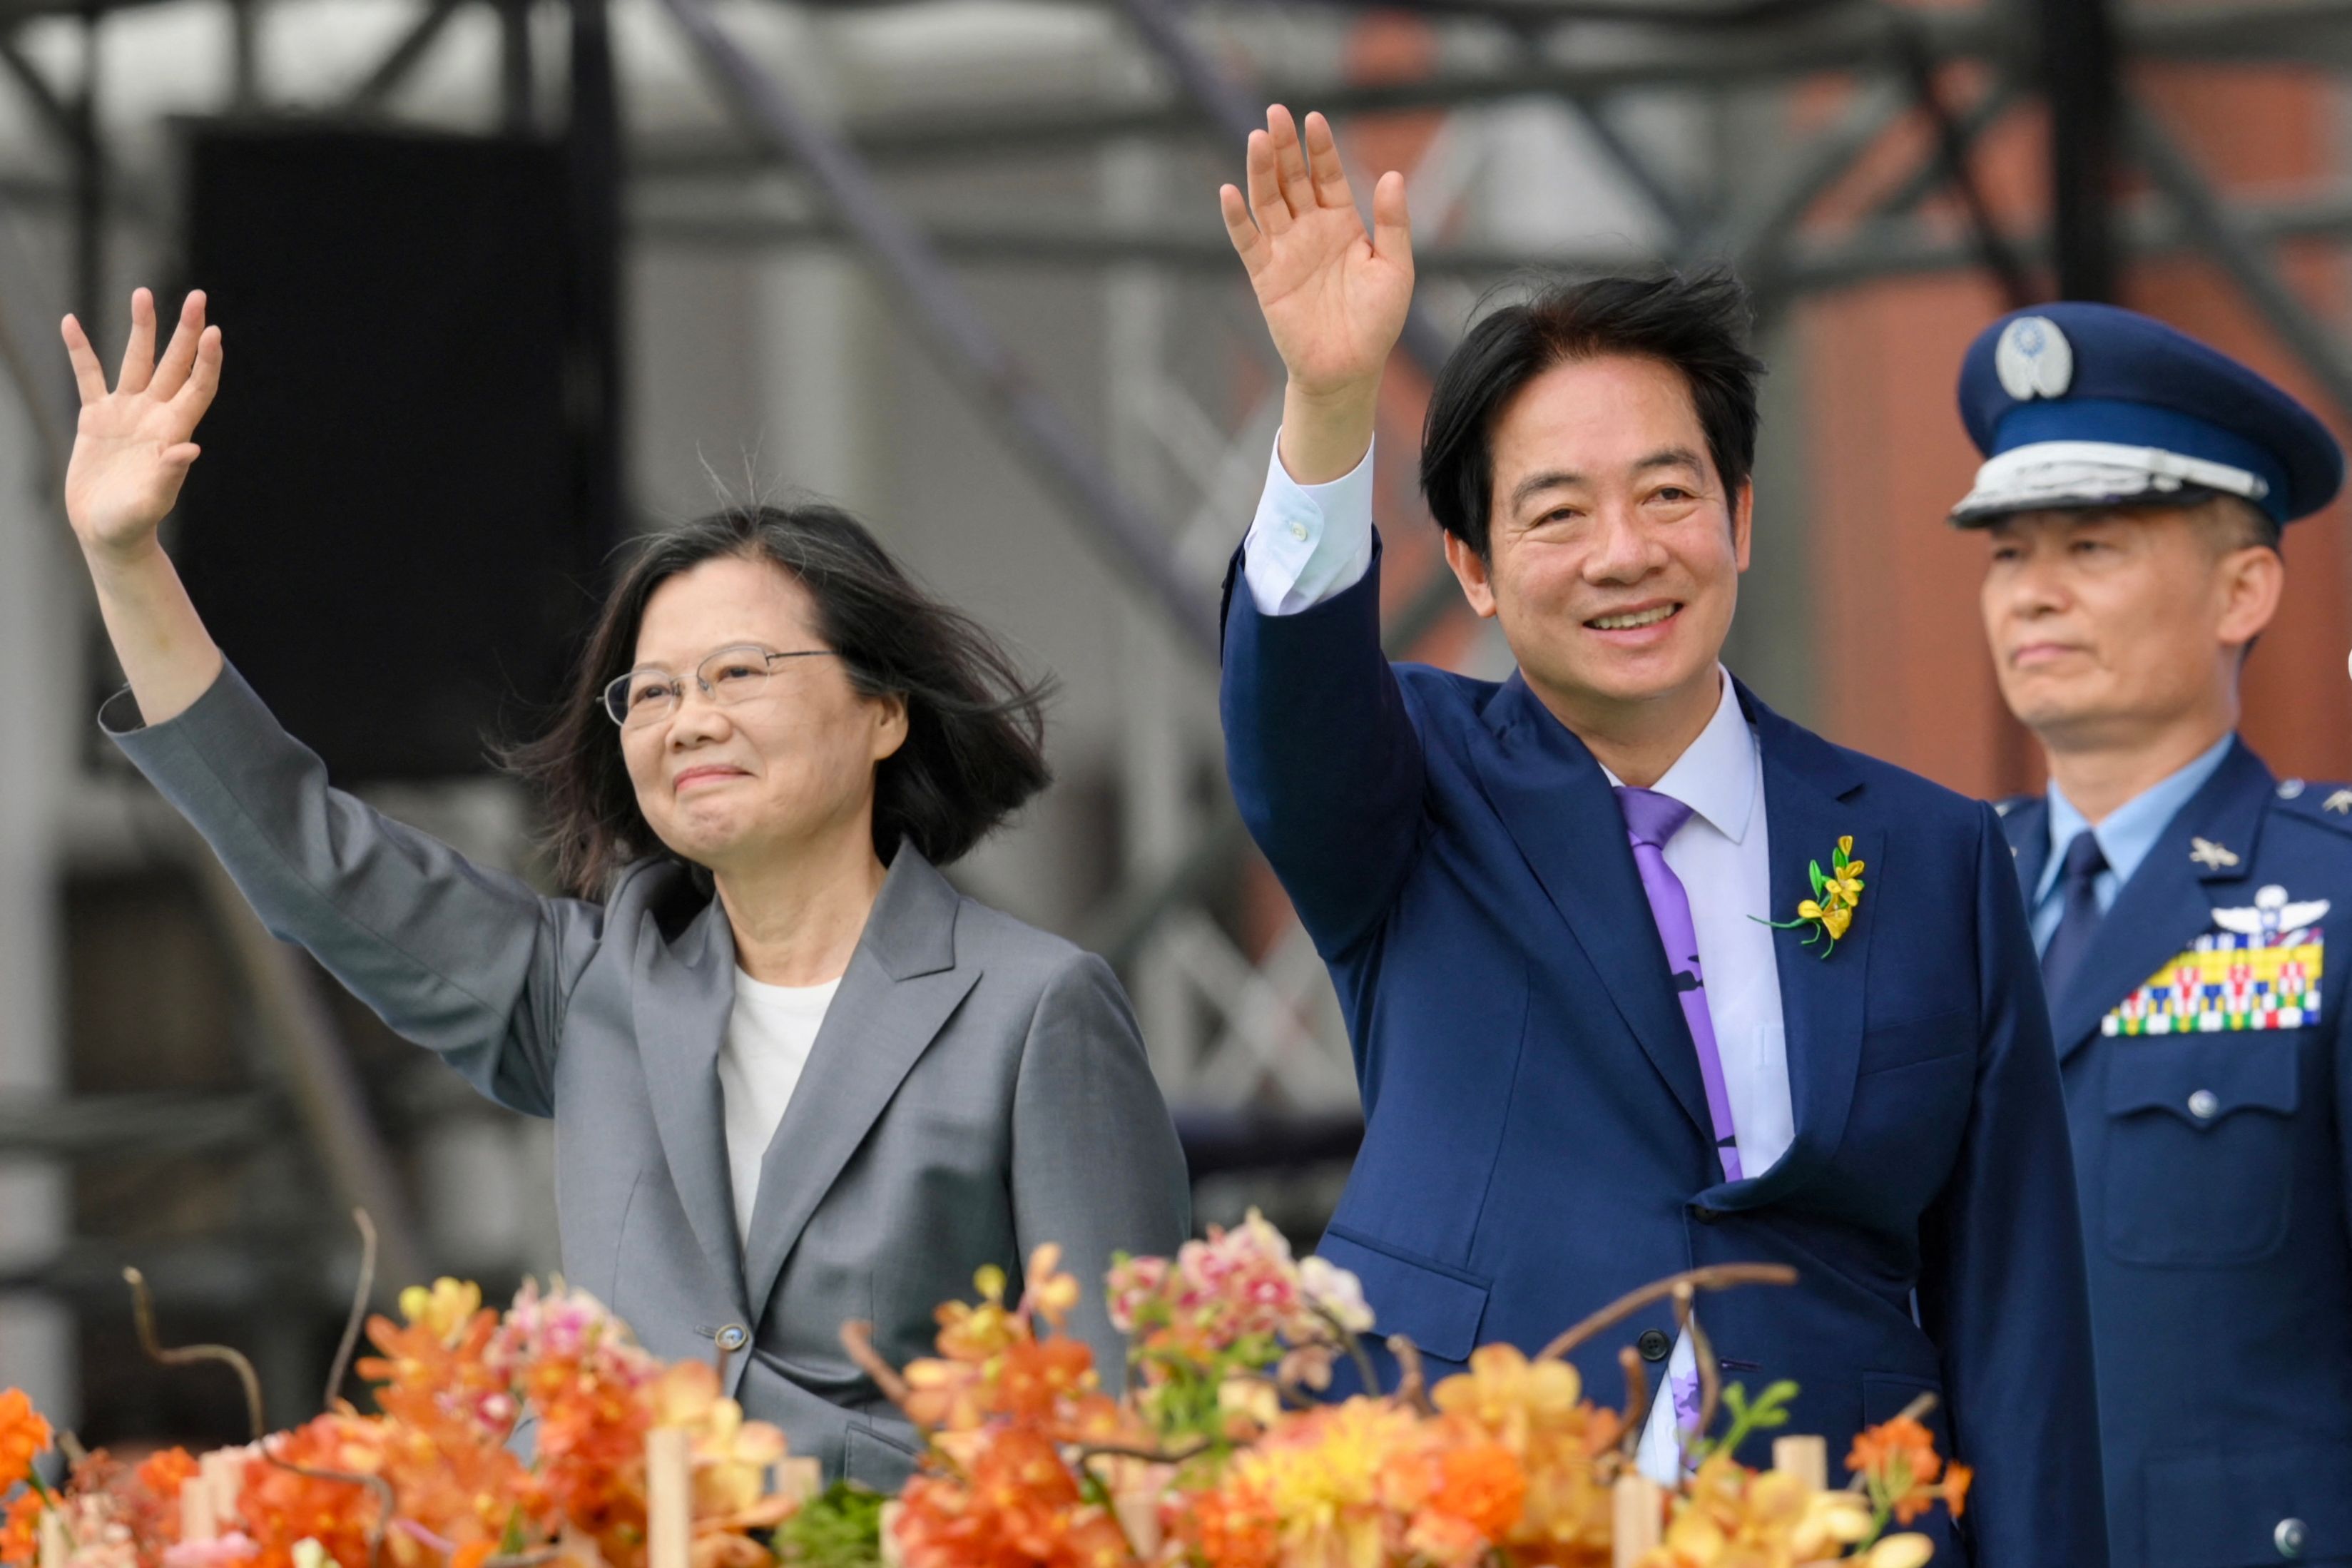 Taiwan's President Lai Ching-te (R) waves alongside outgoing president Tsai Ing-wen during the inauguration ceremony at the Presidential Office Building in Taipei on May 20, 2024. (Photo by Sam YEH / AFP)